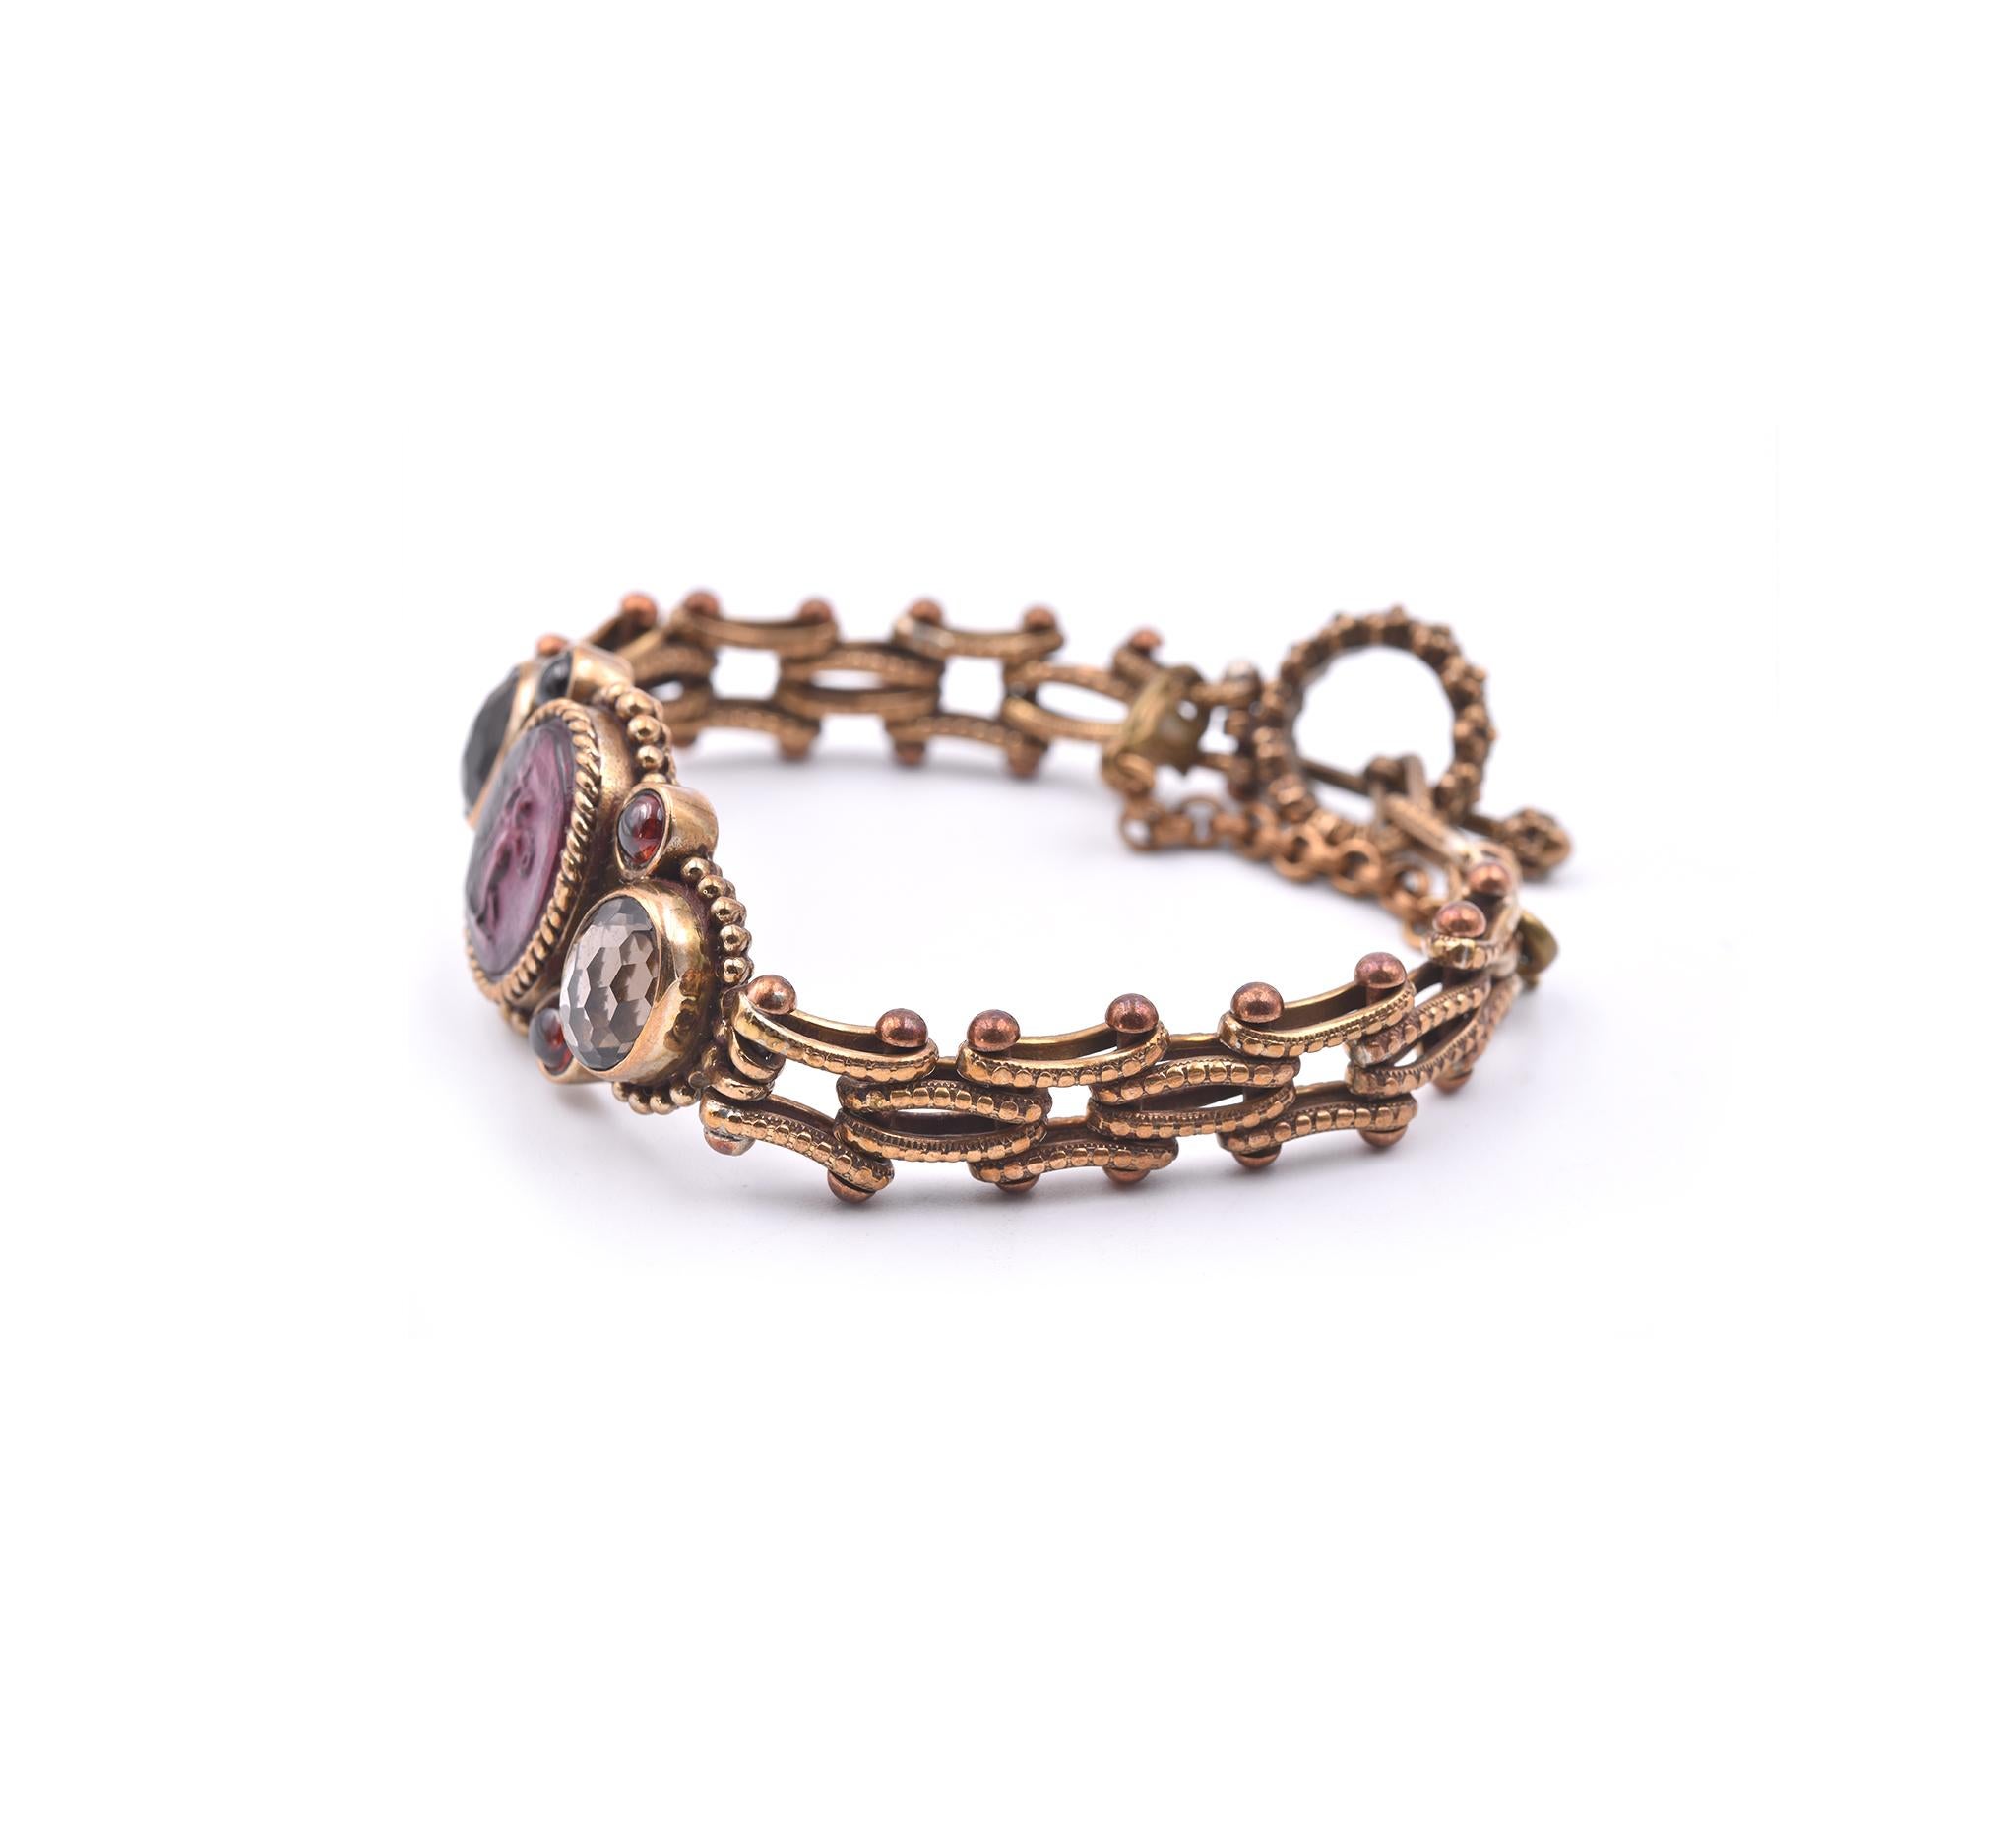 Designer: Stephen Dweck
Material: sterling silver
Gemstones: 4 cabochon garnets, 2 oval faceted smoky quartz
Dimensions: bracelet will fit up to a 7.5-inch wrist
Weight: 35.26 grams	
